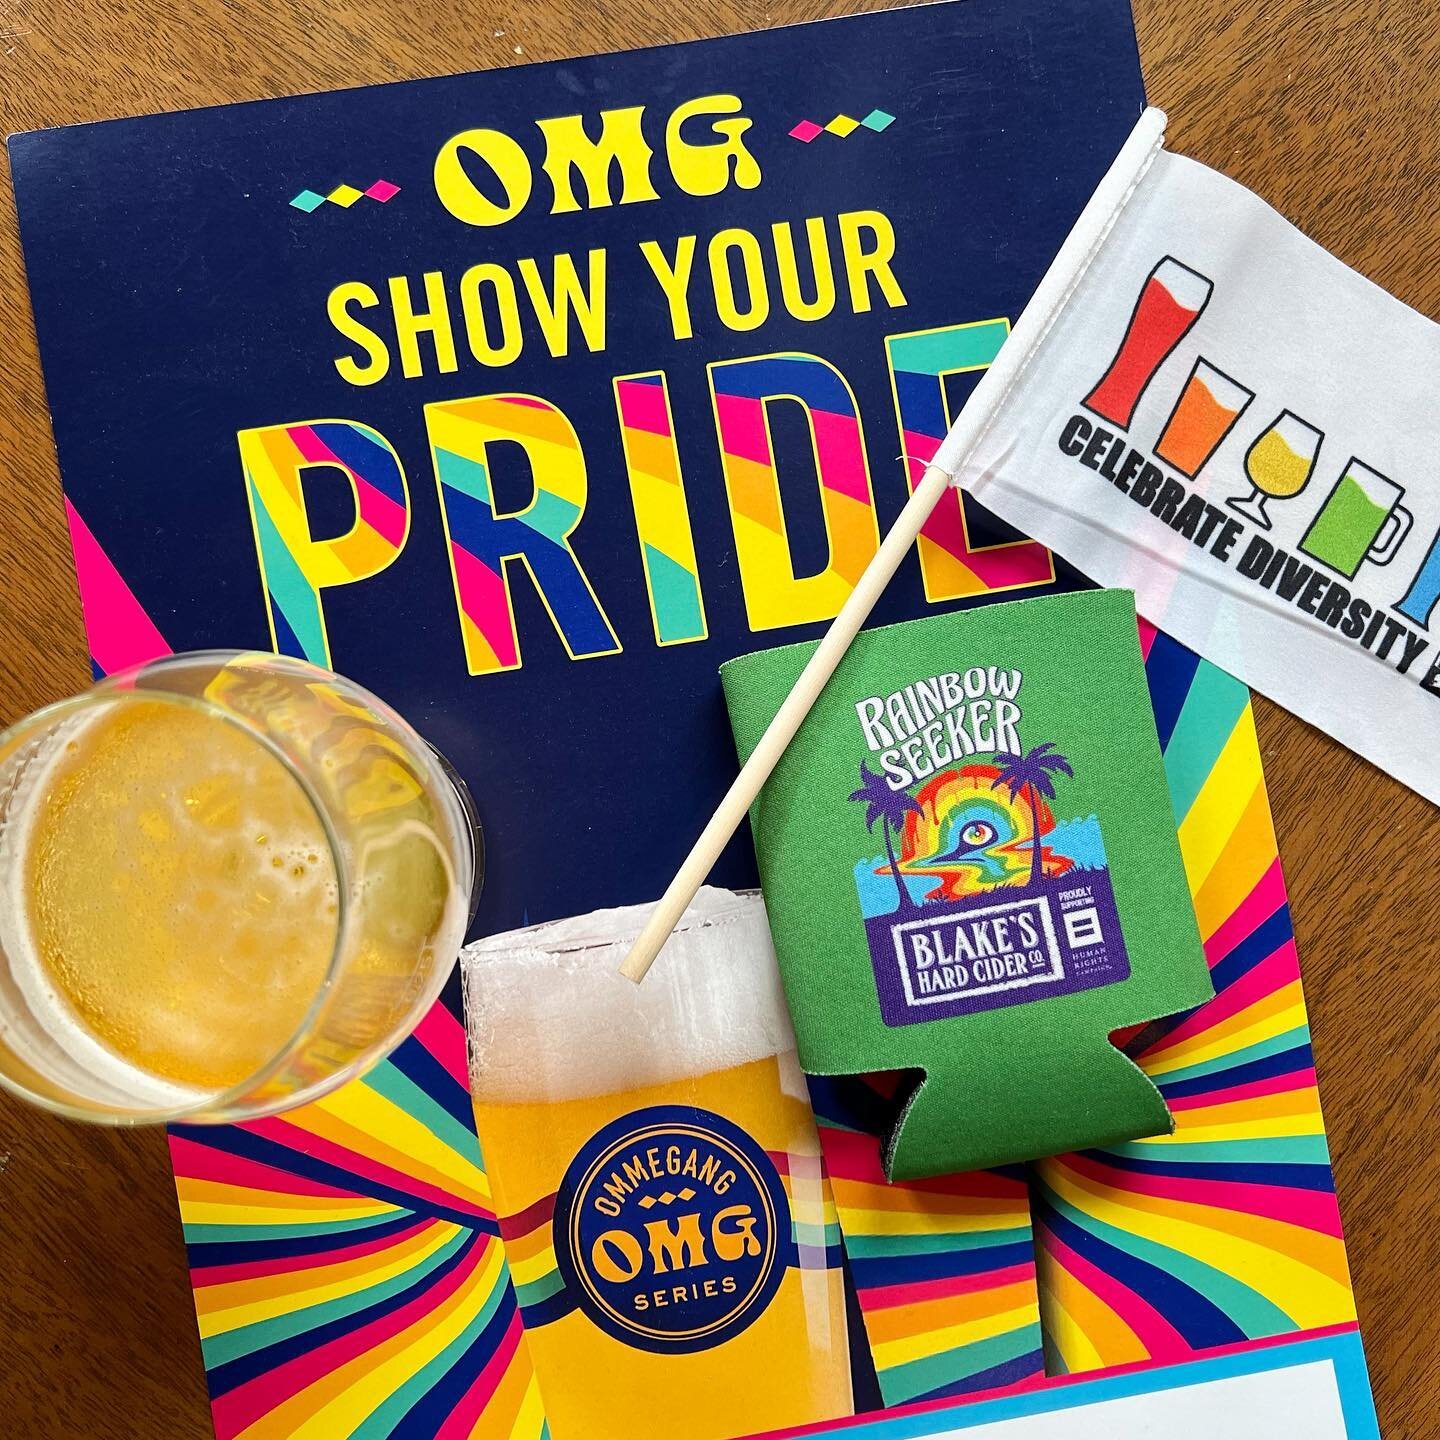 Happy Pride! 🏳️&zwj;🌈
We&rsquo;re here to help you celebrate with a cold draft beer or a glass of wine! And if you&rsquo;re headed to a party tonight we&rsquo;d love to help you find that perfect bottle or four pack for carryout! 🙌

Free #pride🌈 